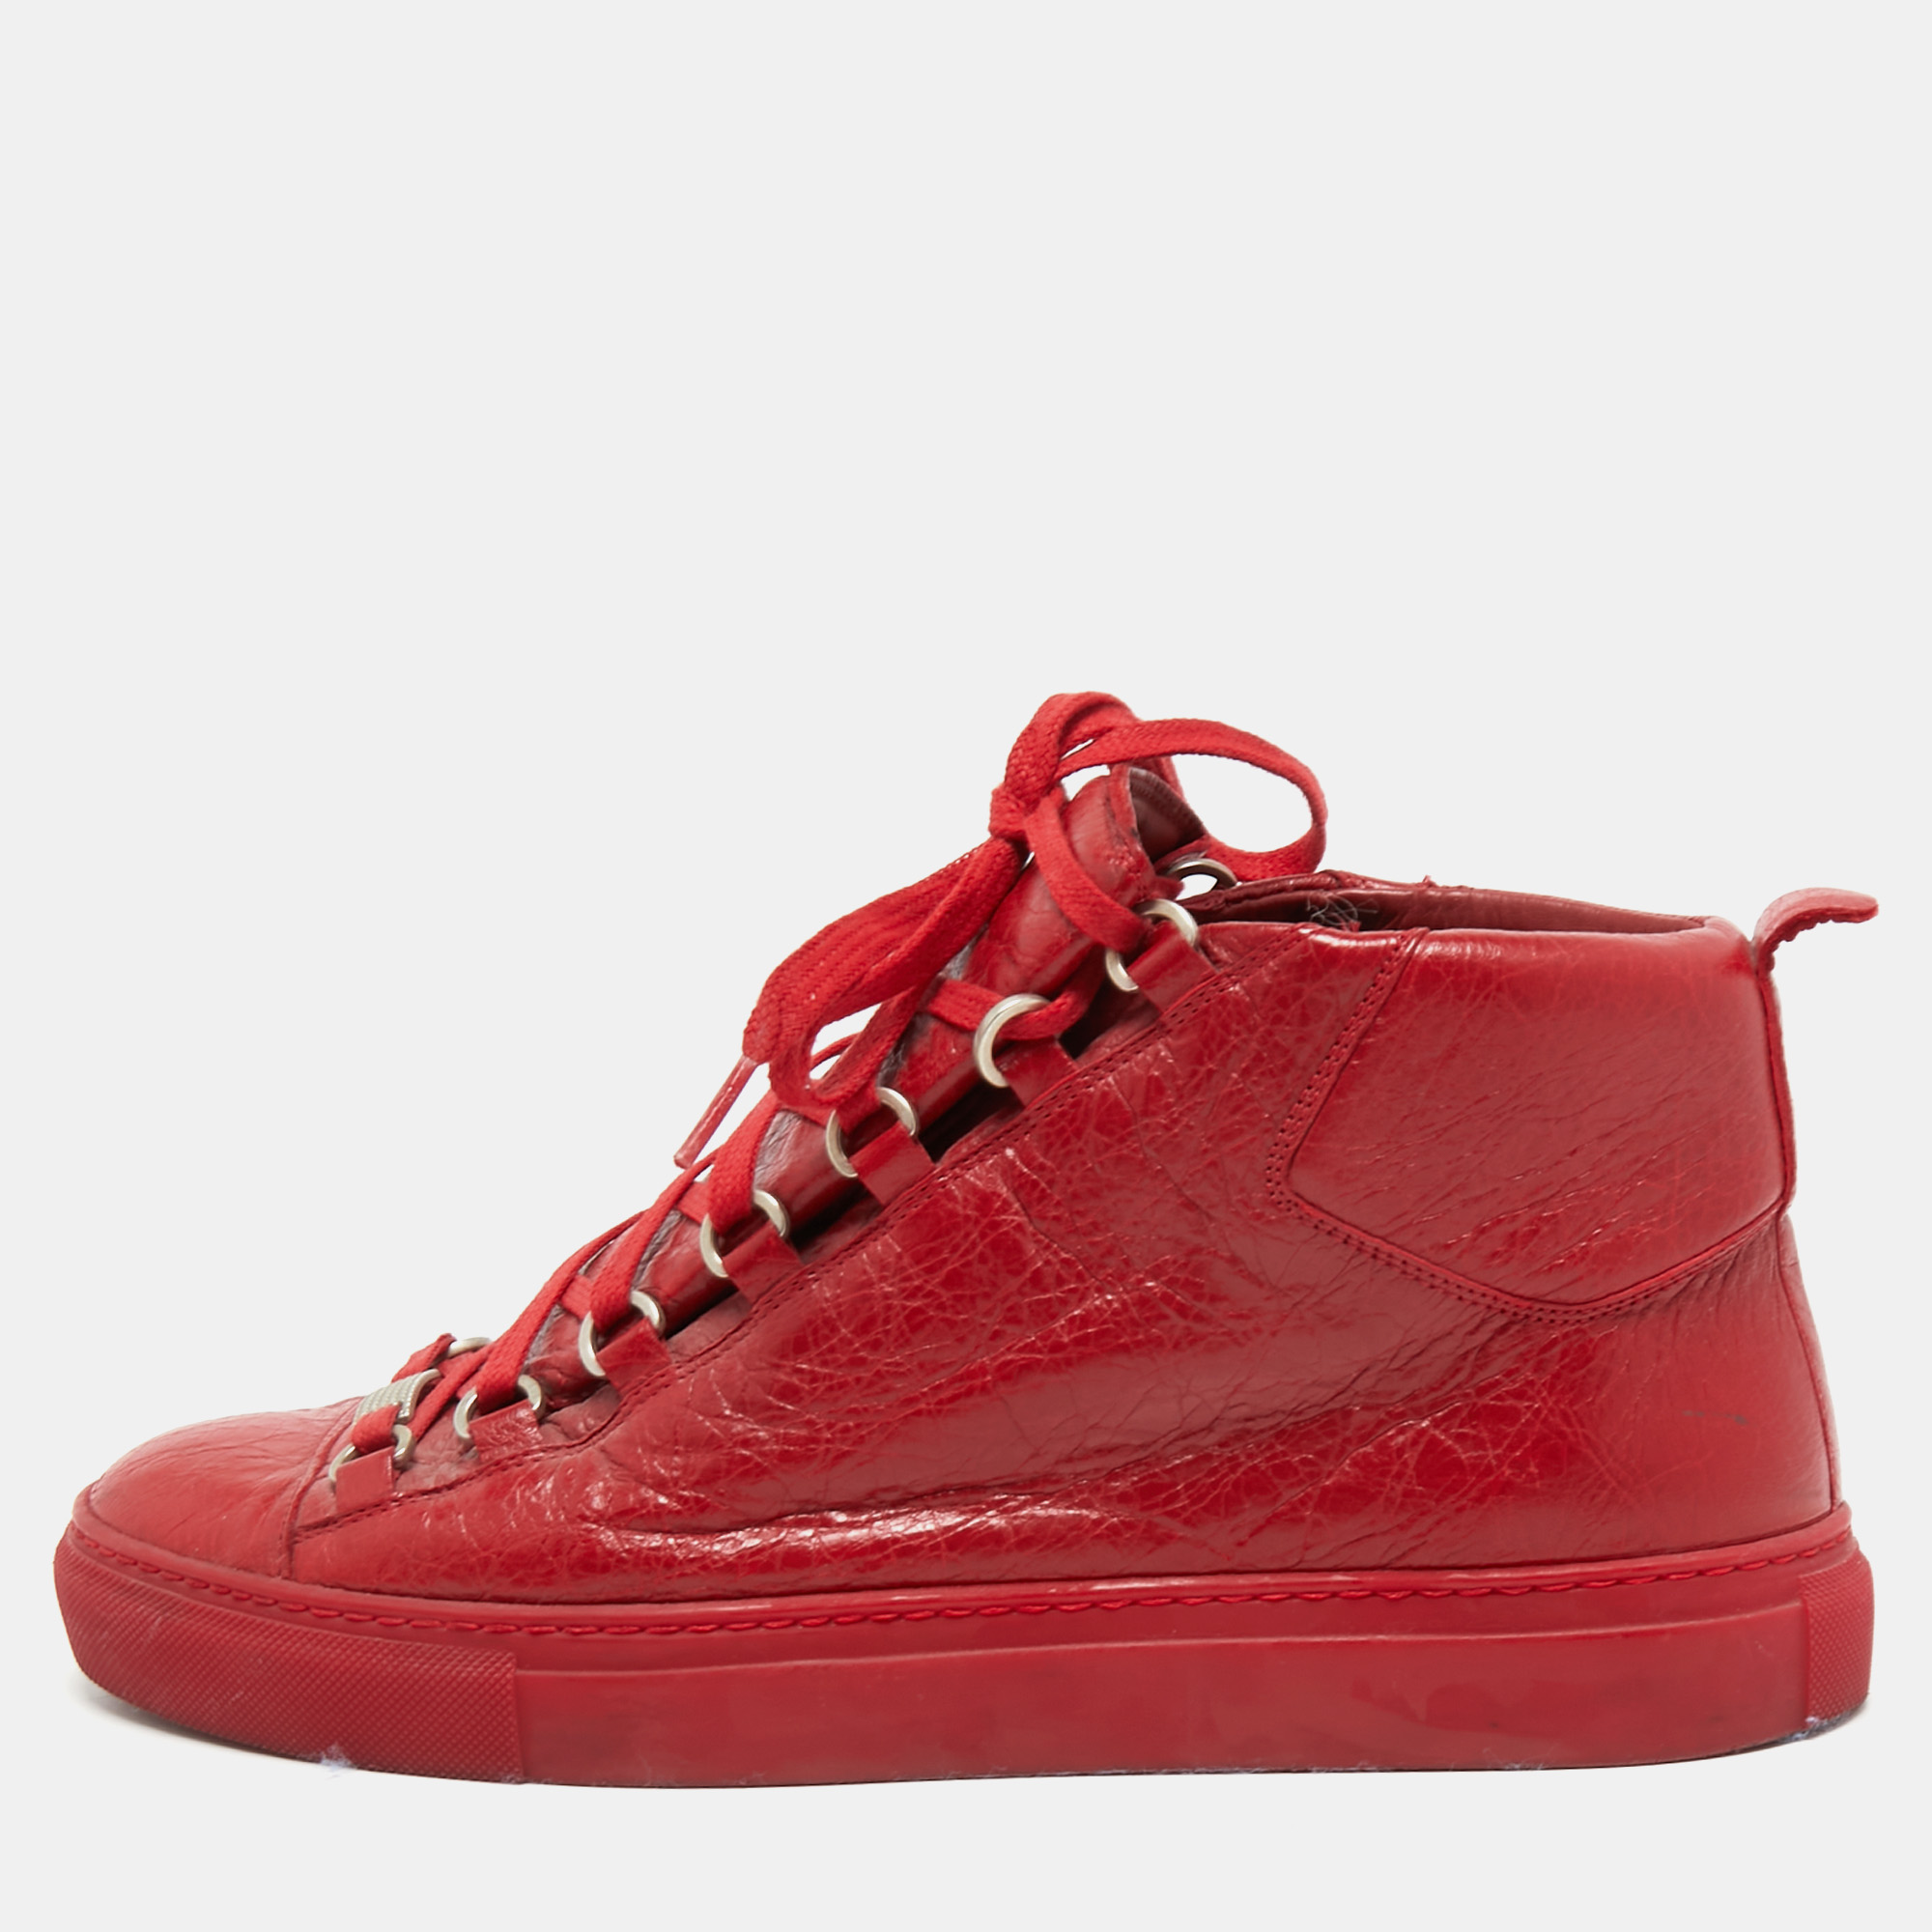 Pre-owned Balenciaga Red Leather Arena High Top Sneakers Size 41